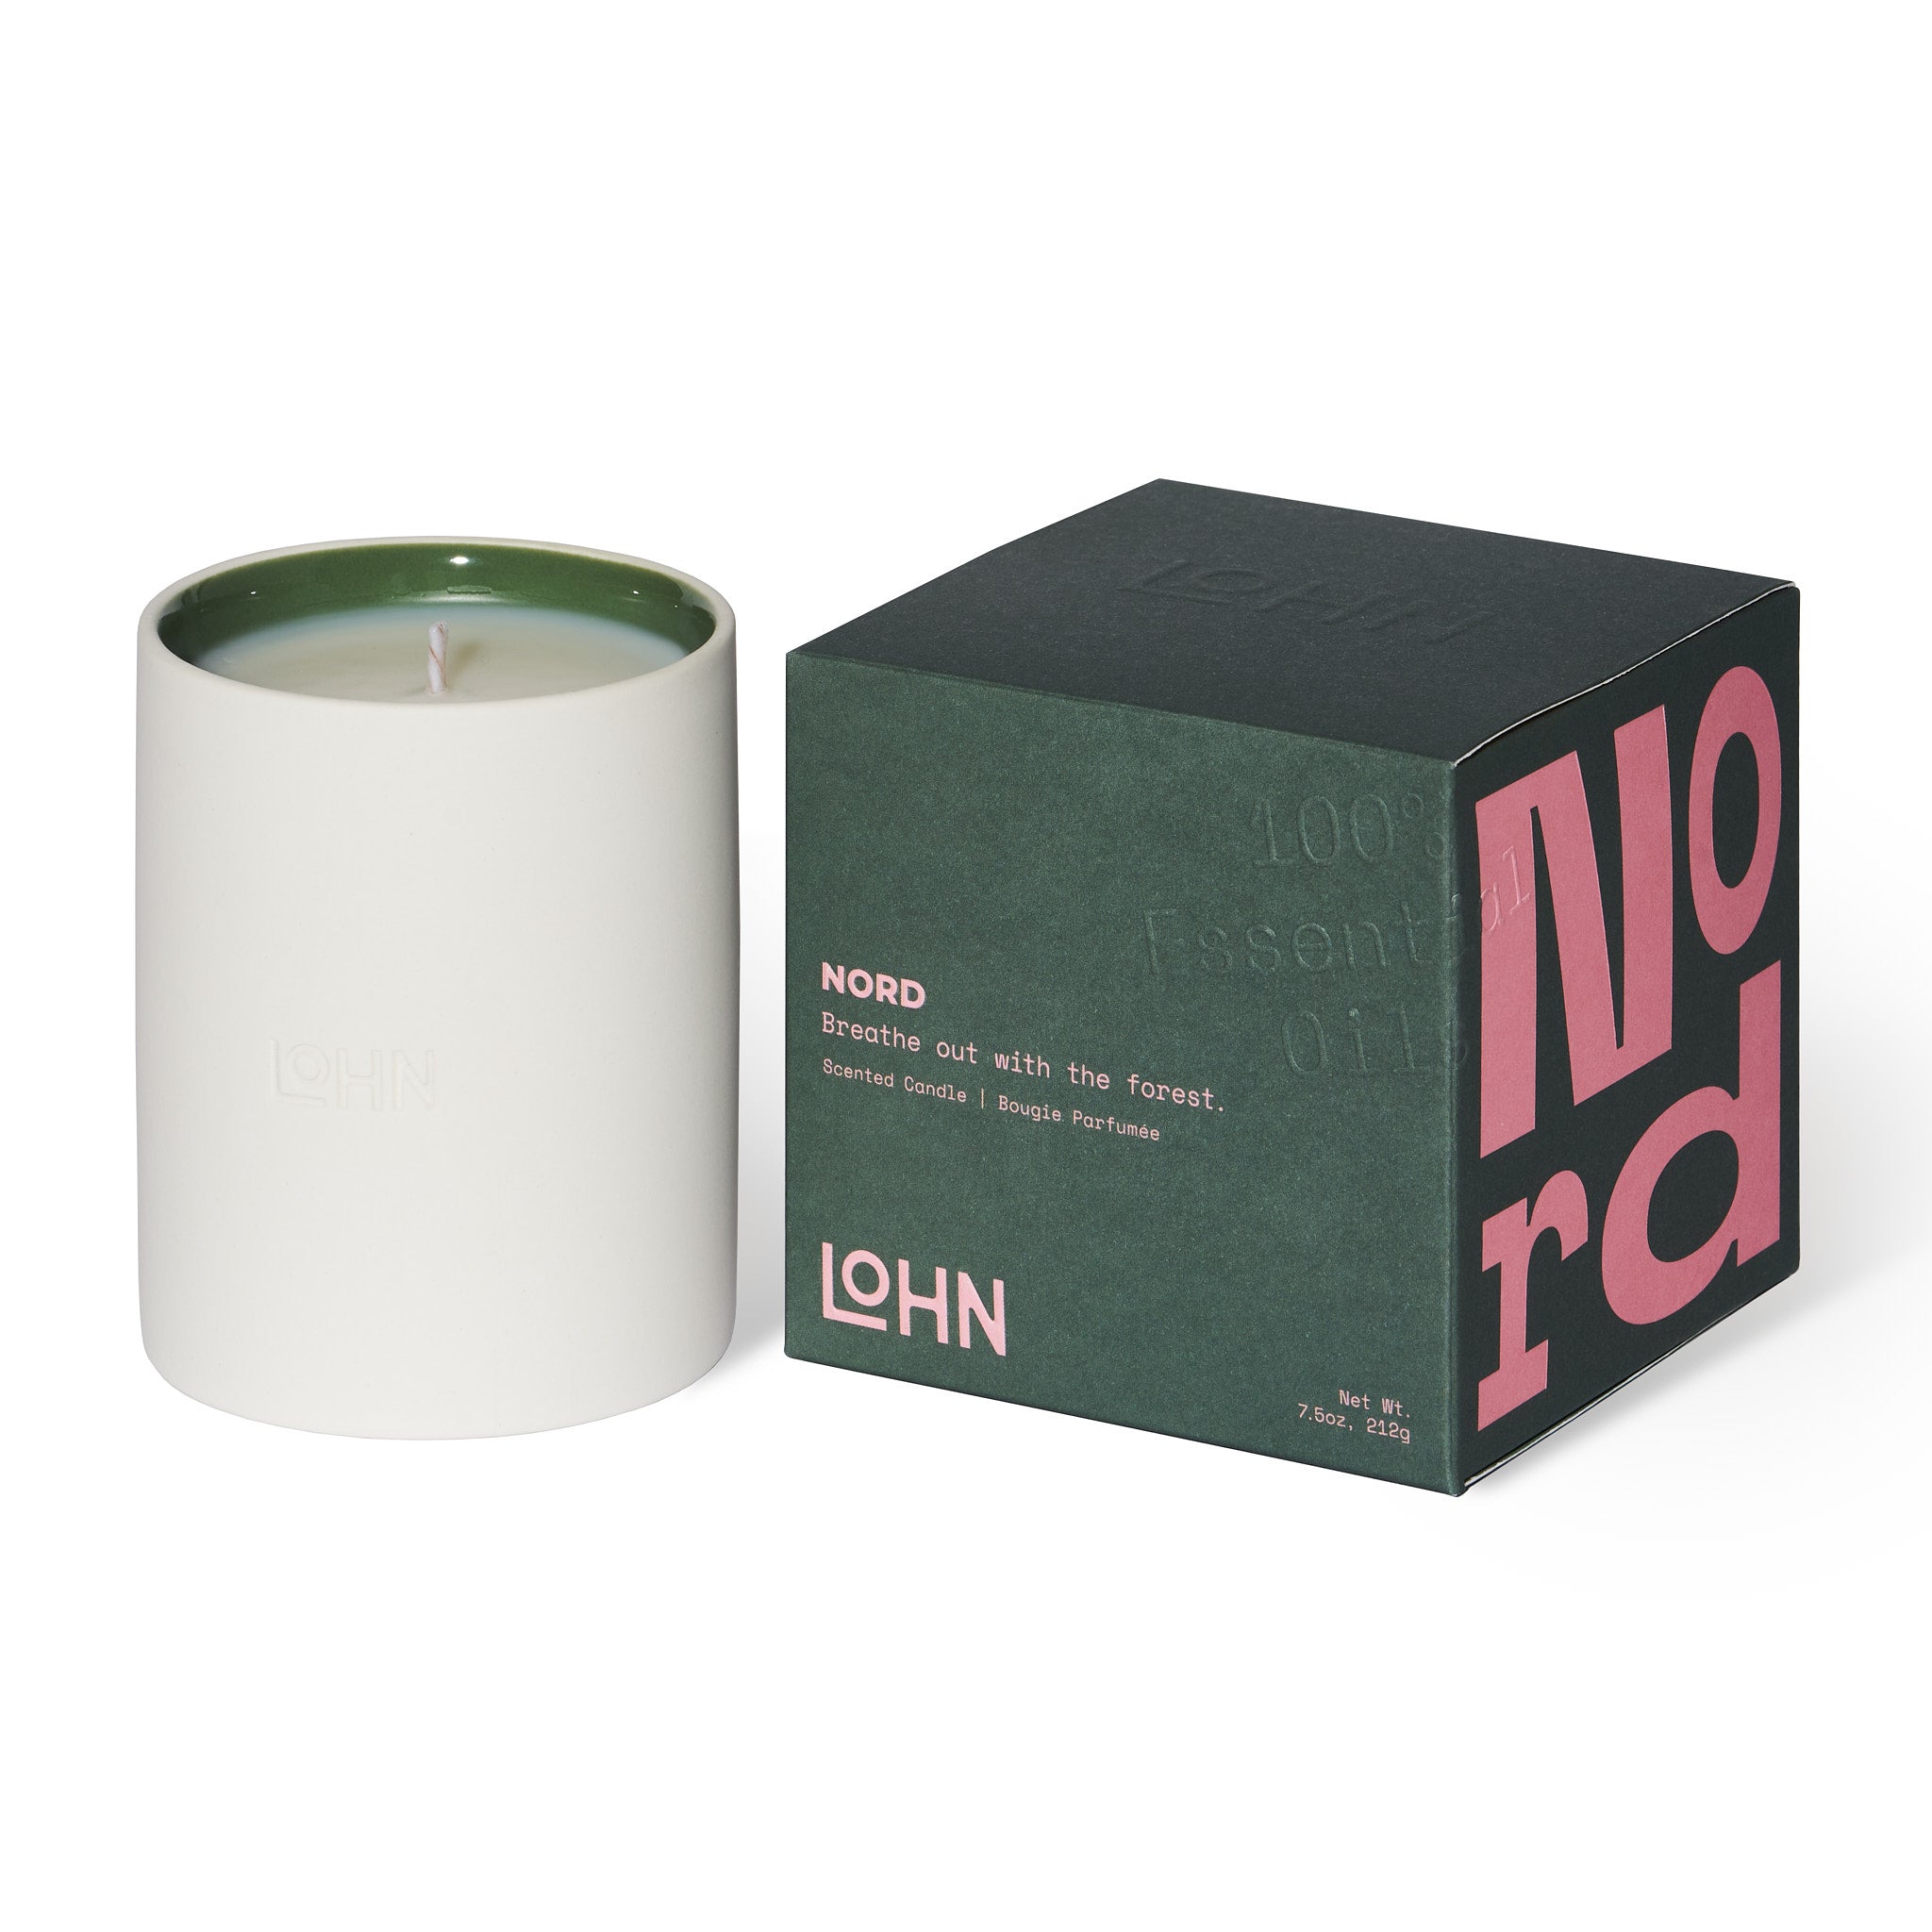 Lohn Candle Forage Collection - NORD - Black Spruce & Pine